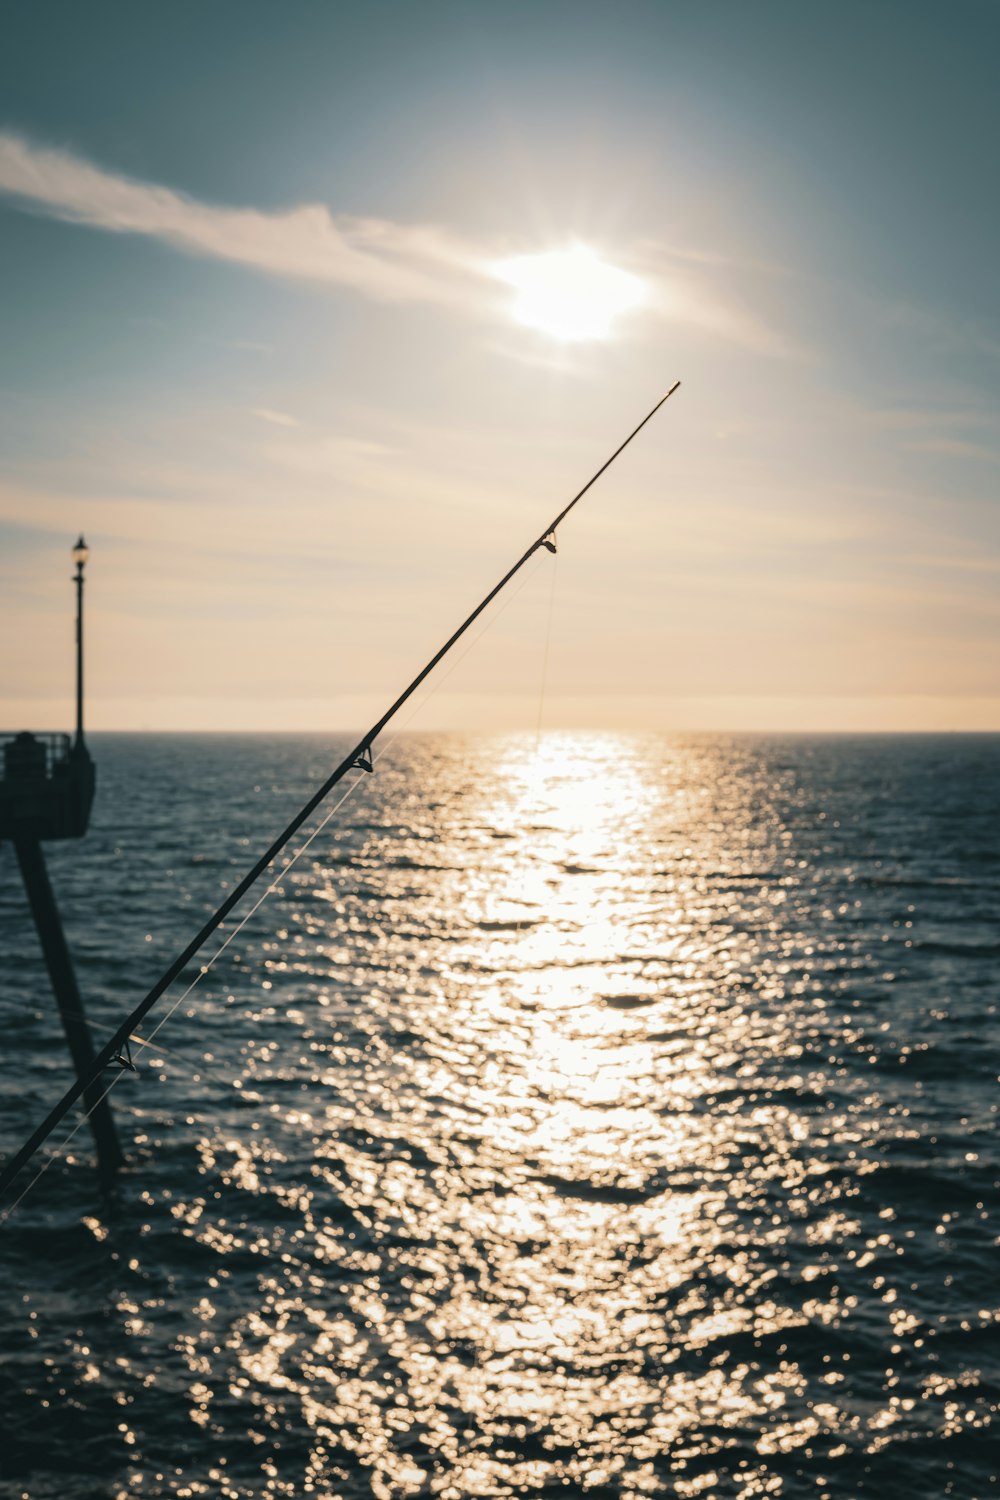 a fishing rod on a boat in the ocean